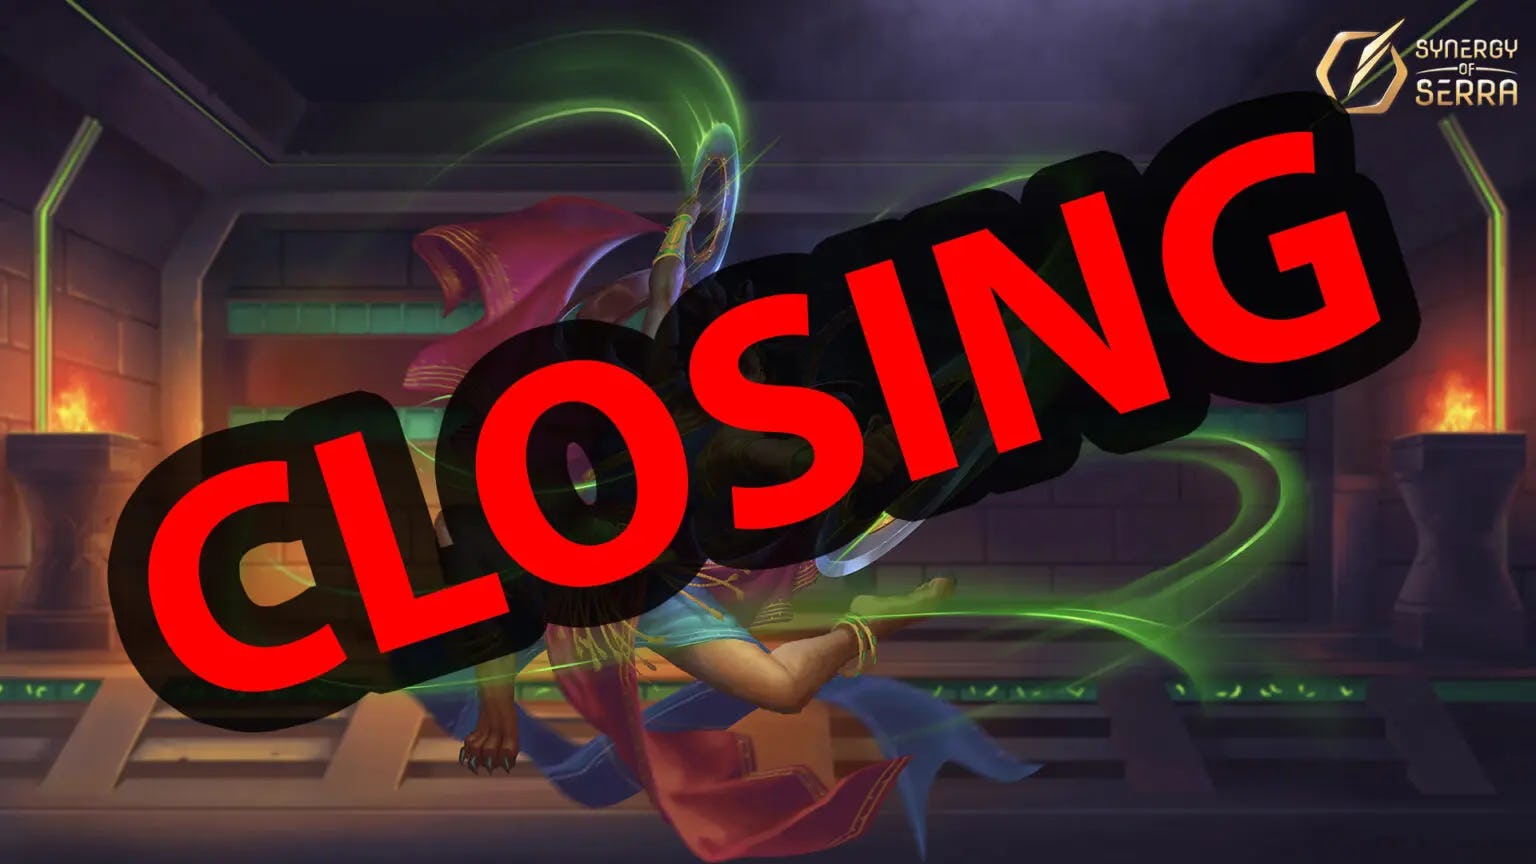 Trading Card Game Synergy of Serra Shuts Down